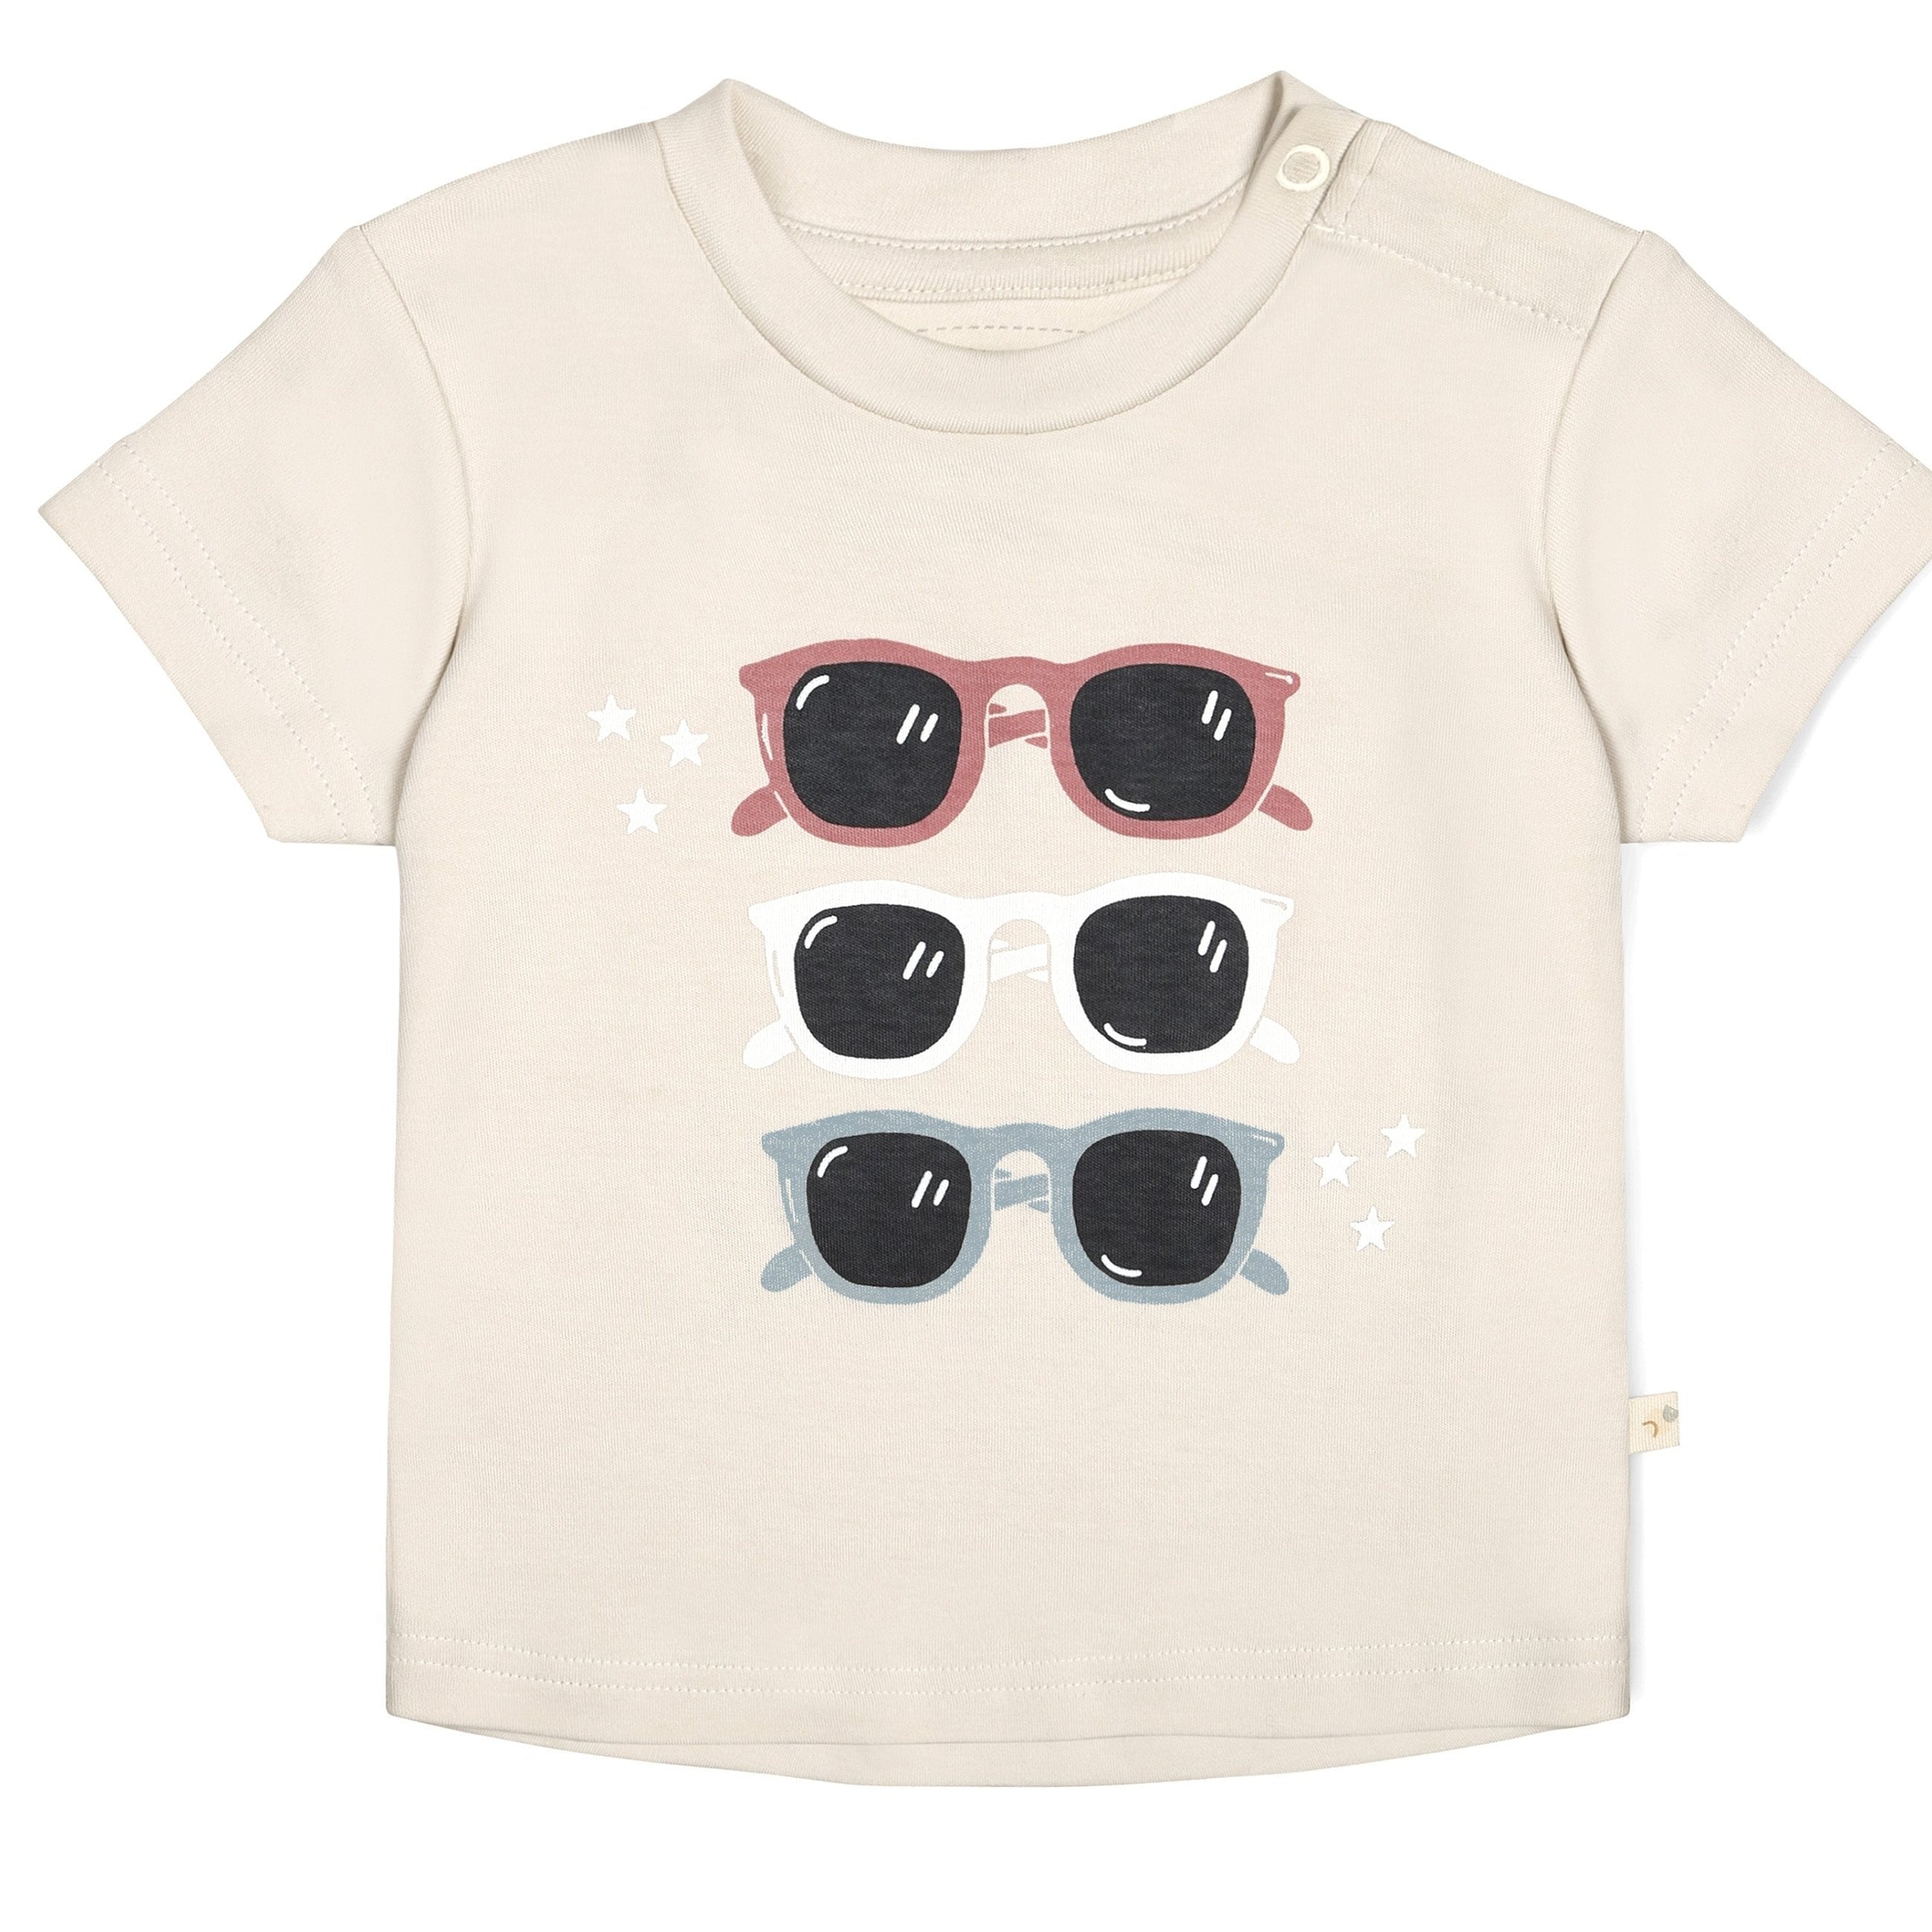 A beige toddler Organic Crew Neck Tee - Shades featuring a cute print of three sunglasses in varying colors of pink, white, and blue, each adorned with star motifs around them by Makemake Organics.